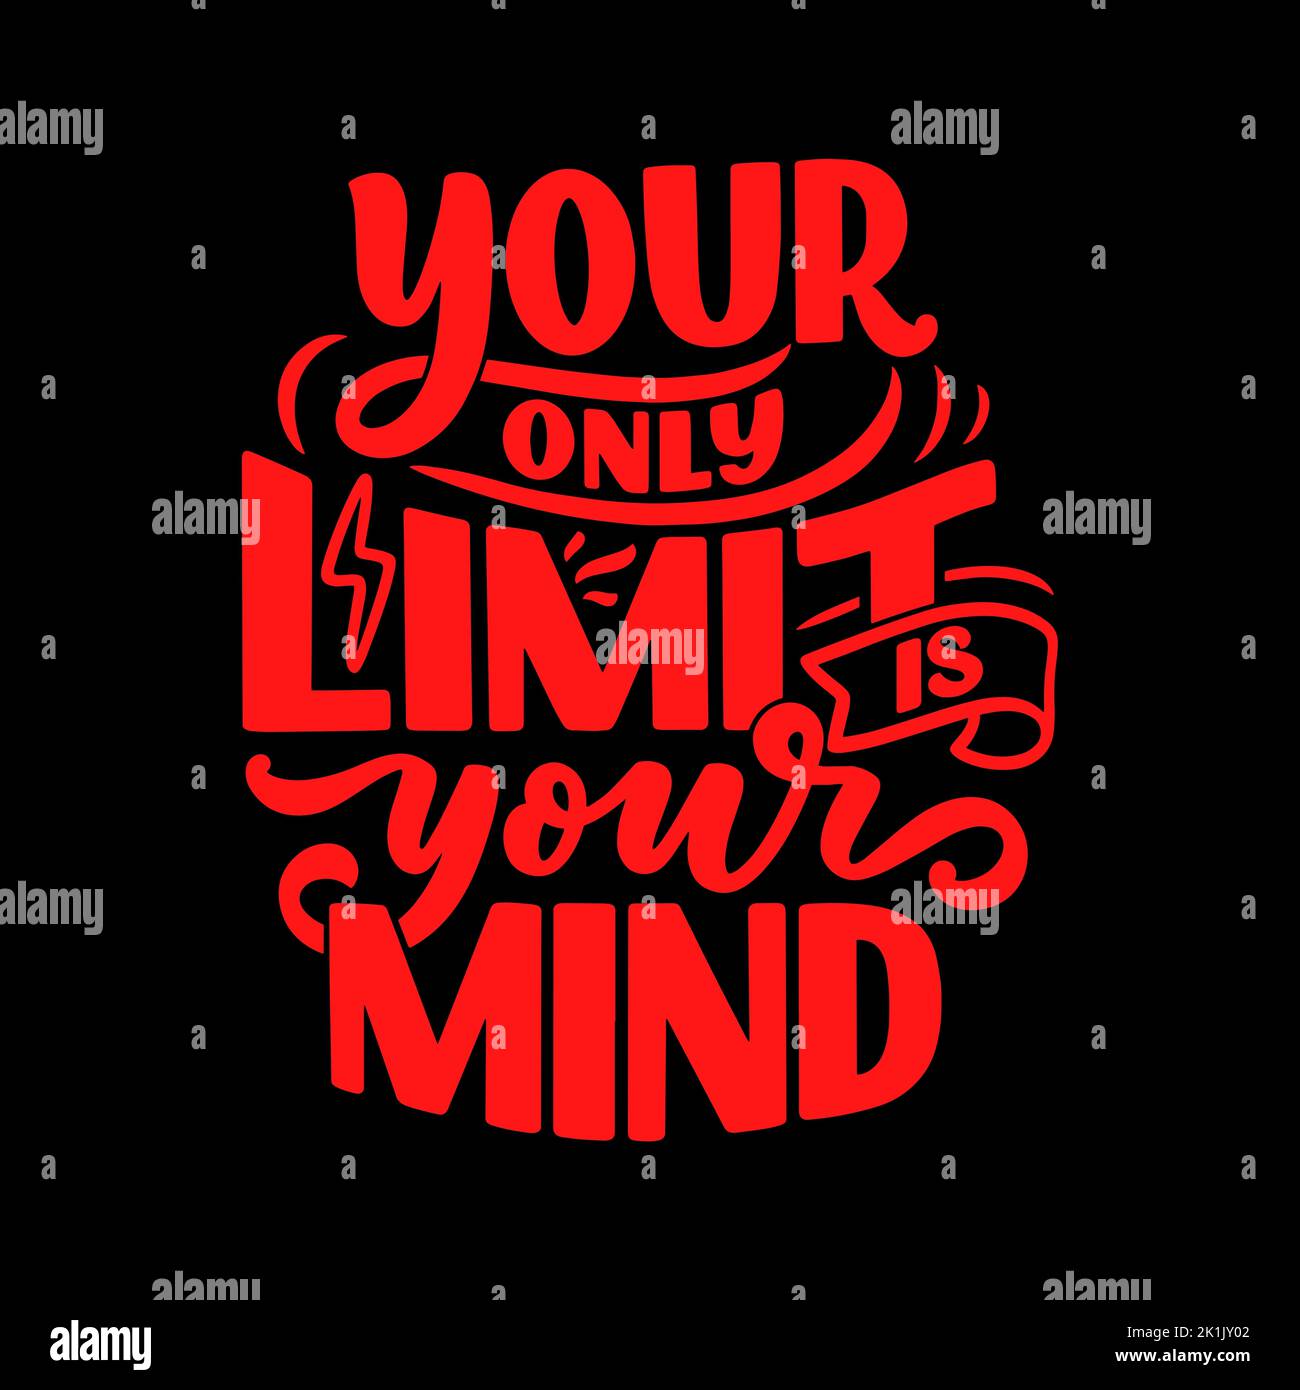 your only limit is your mind. motivational quote poster on black background Stock Photo